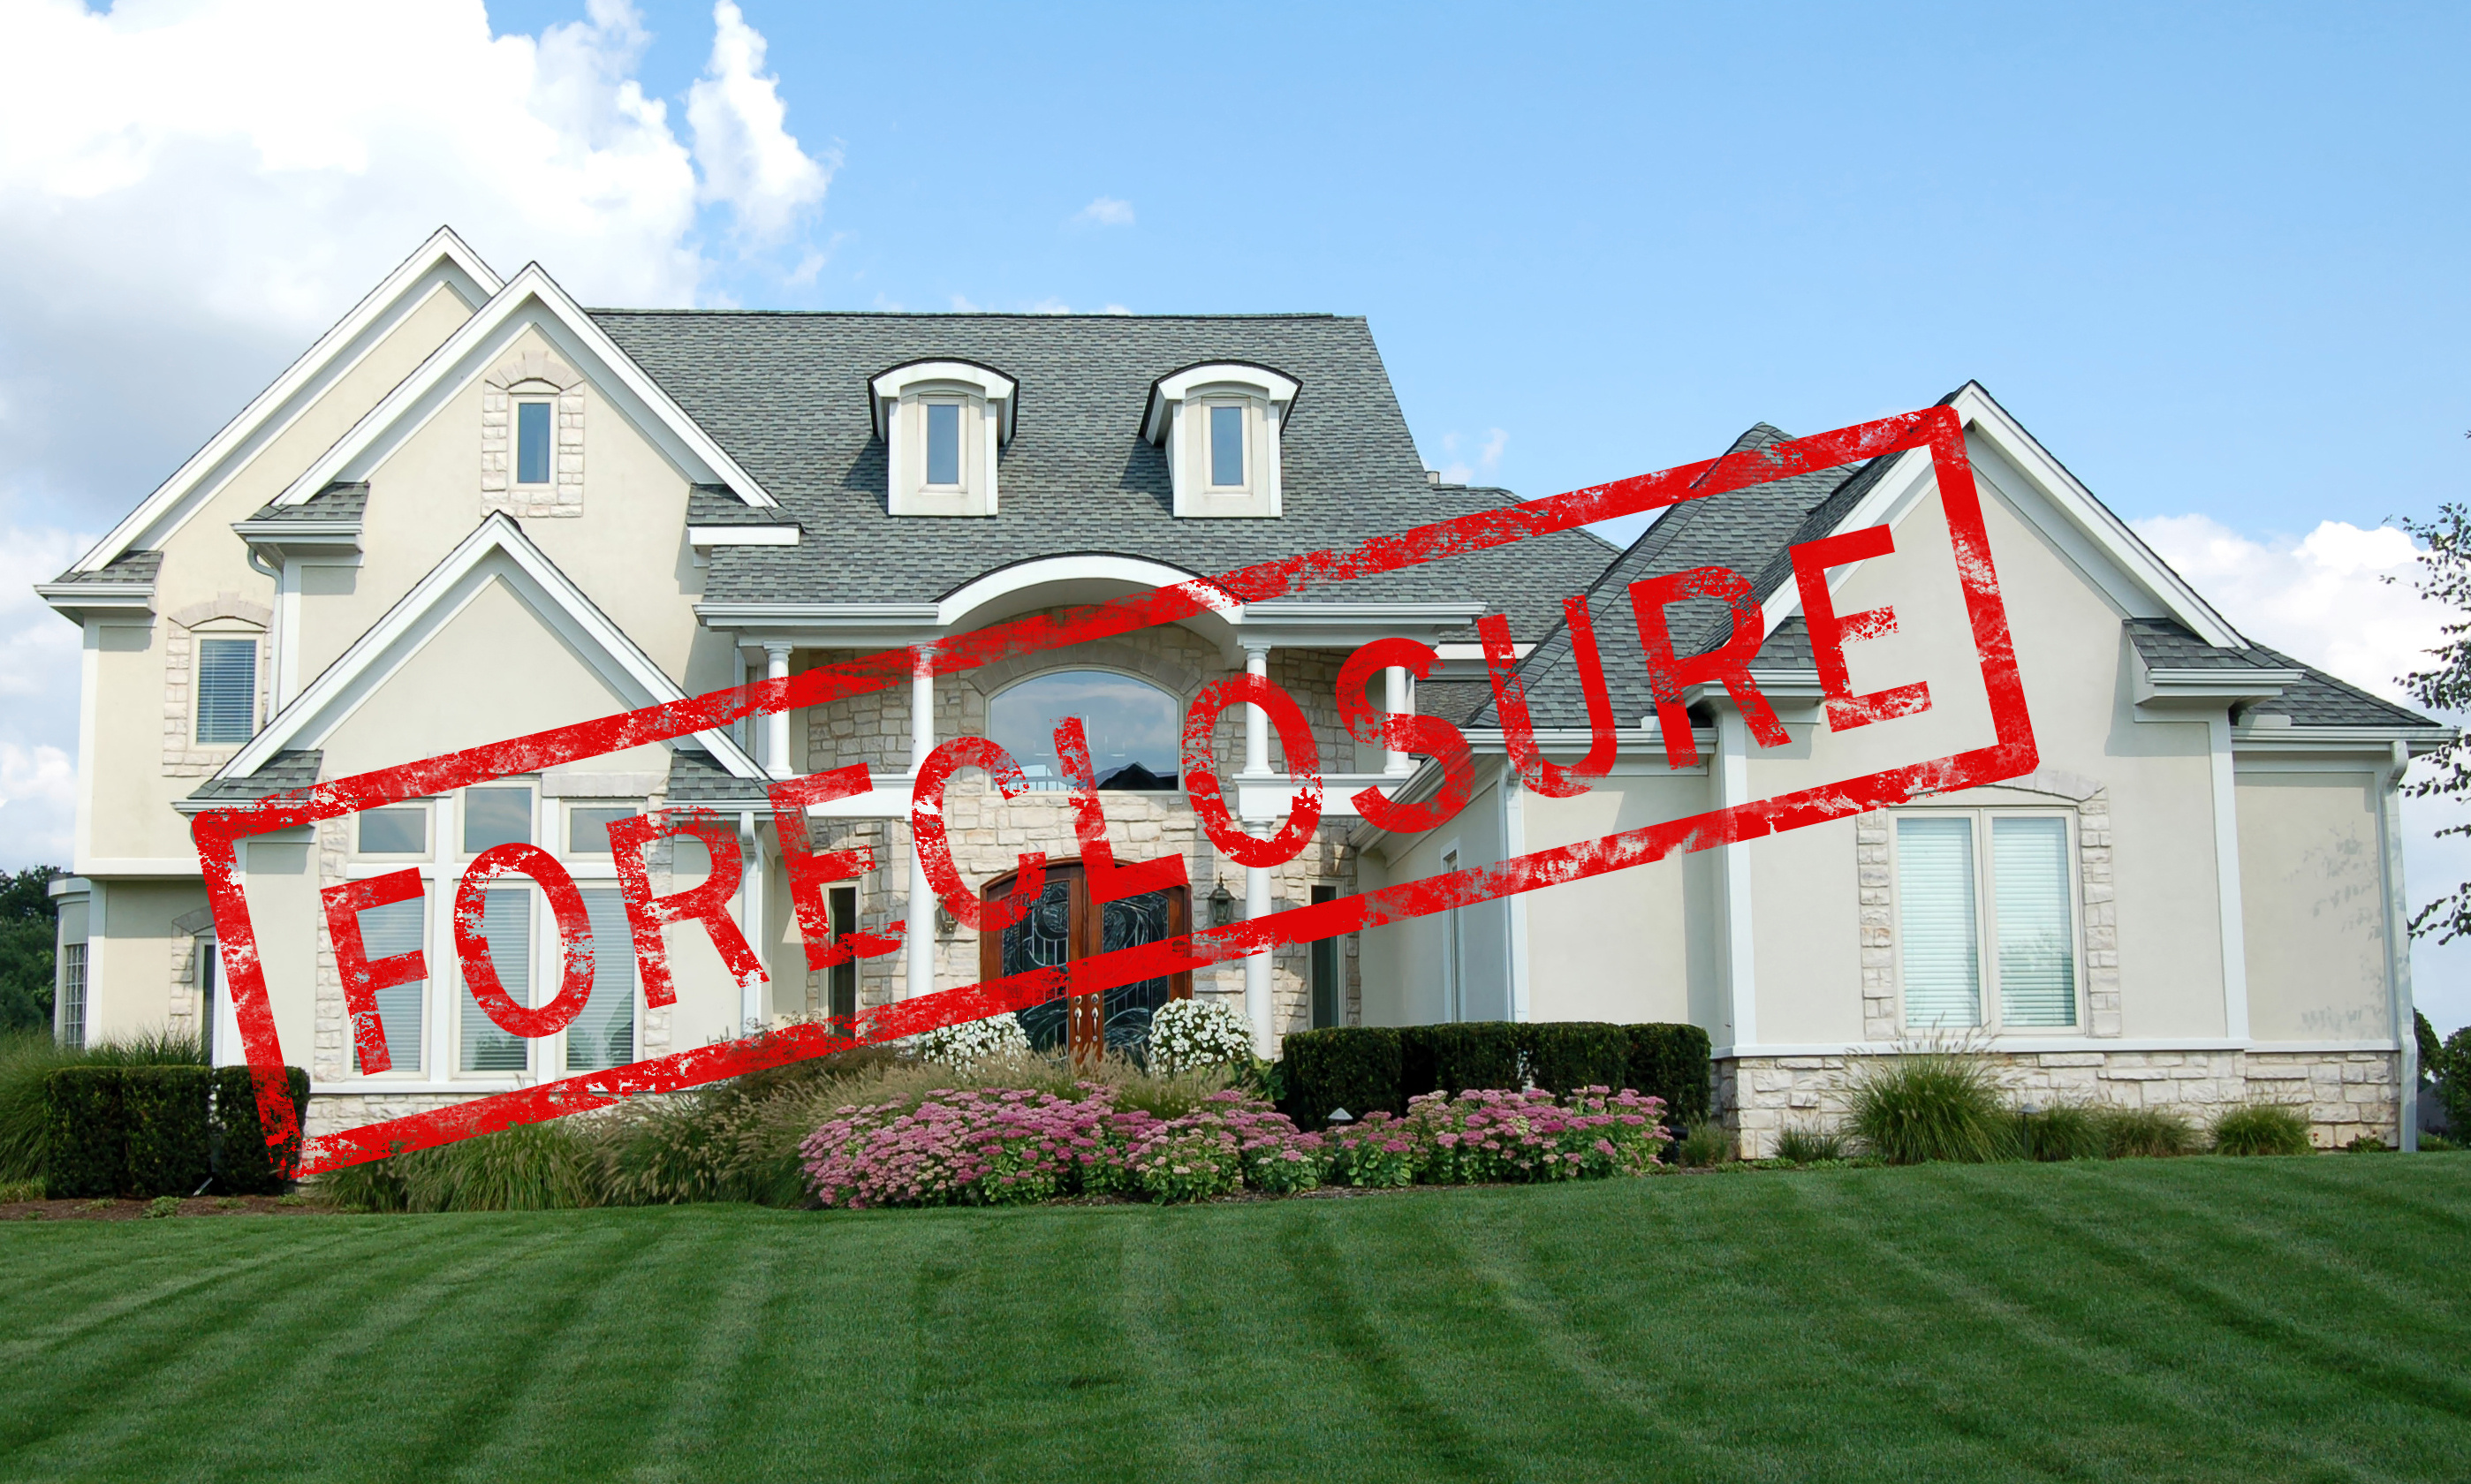 Call Ascension Appraisal to order valuations pertaining to Worcester foreclosures